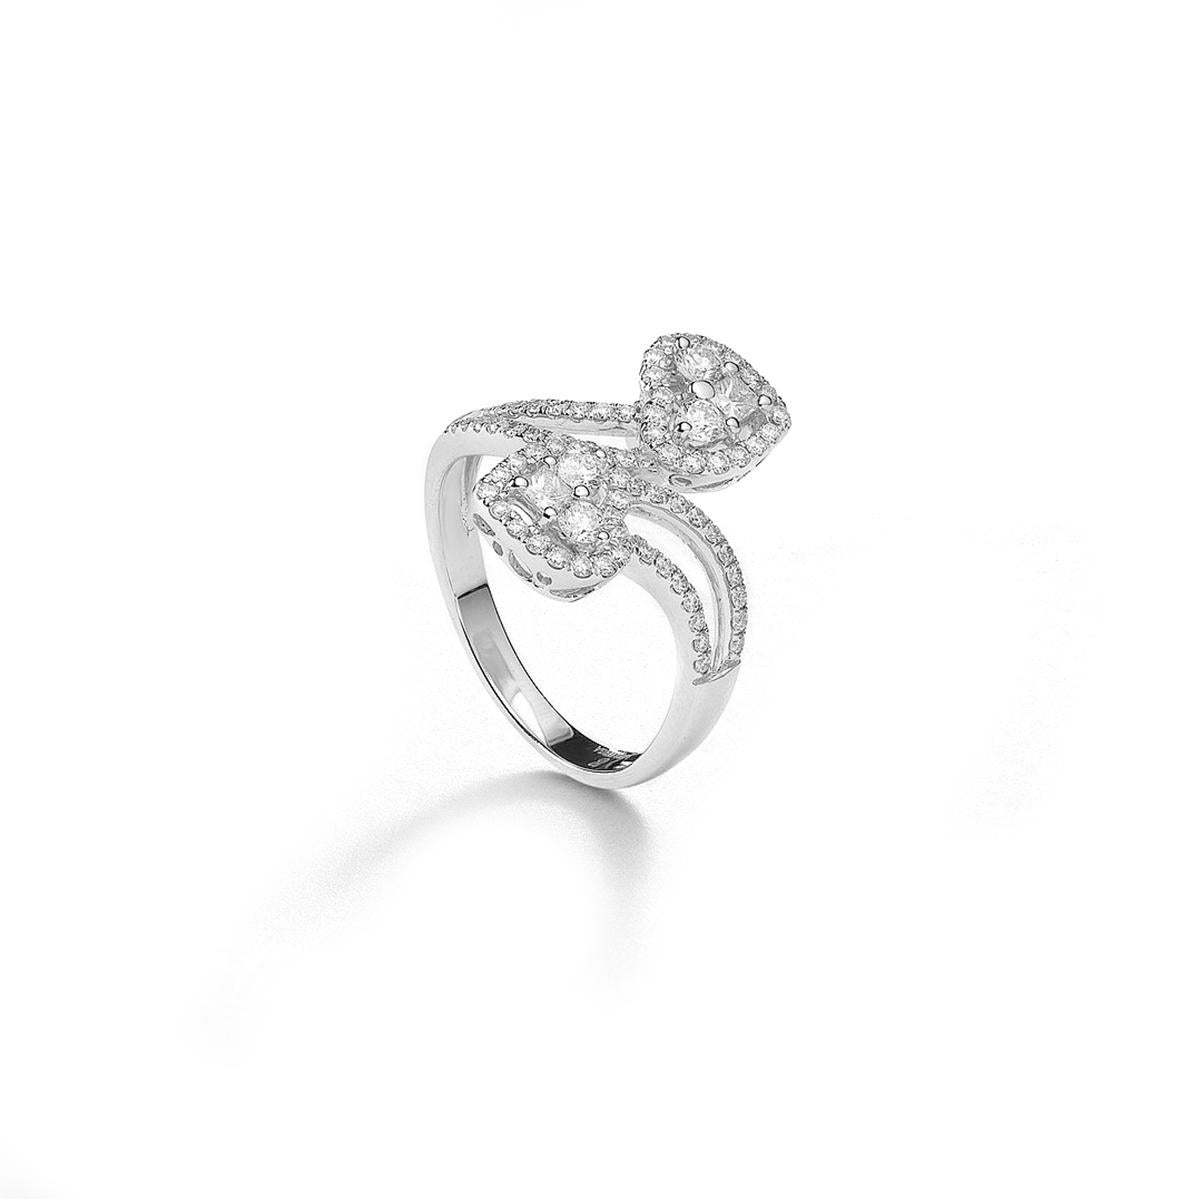 Ring two heart in 18kt white gold set with 2 princess cut diamonds 0.13 cts and 76 diamonds 0.61 cts Size 53           

Total weight: 3.86 grams